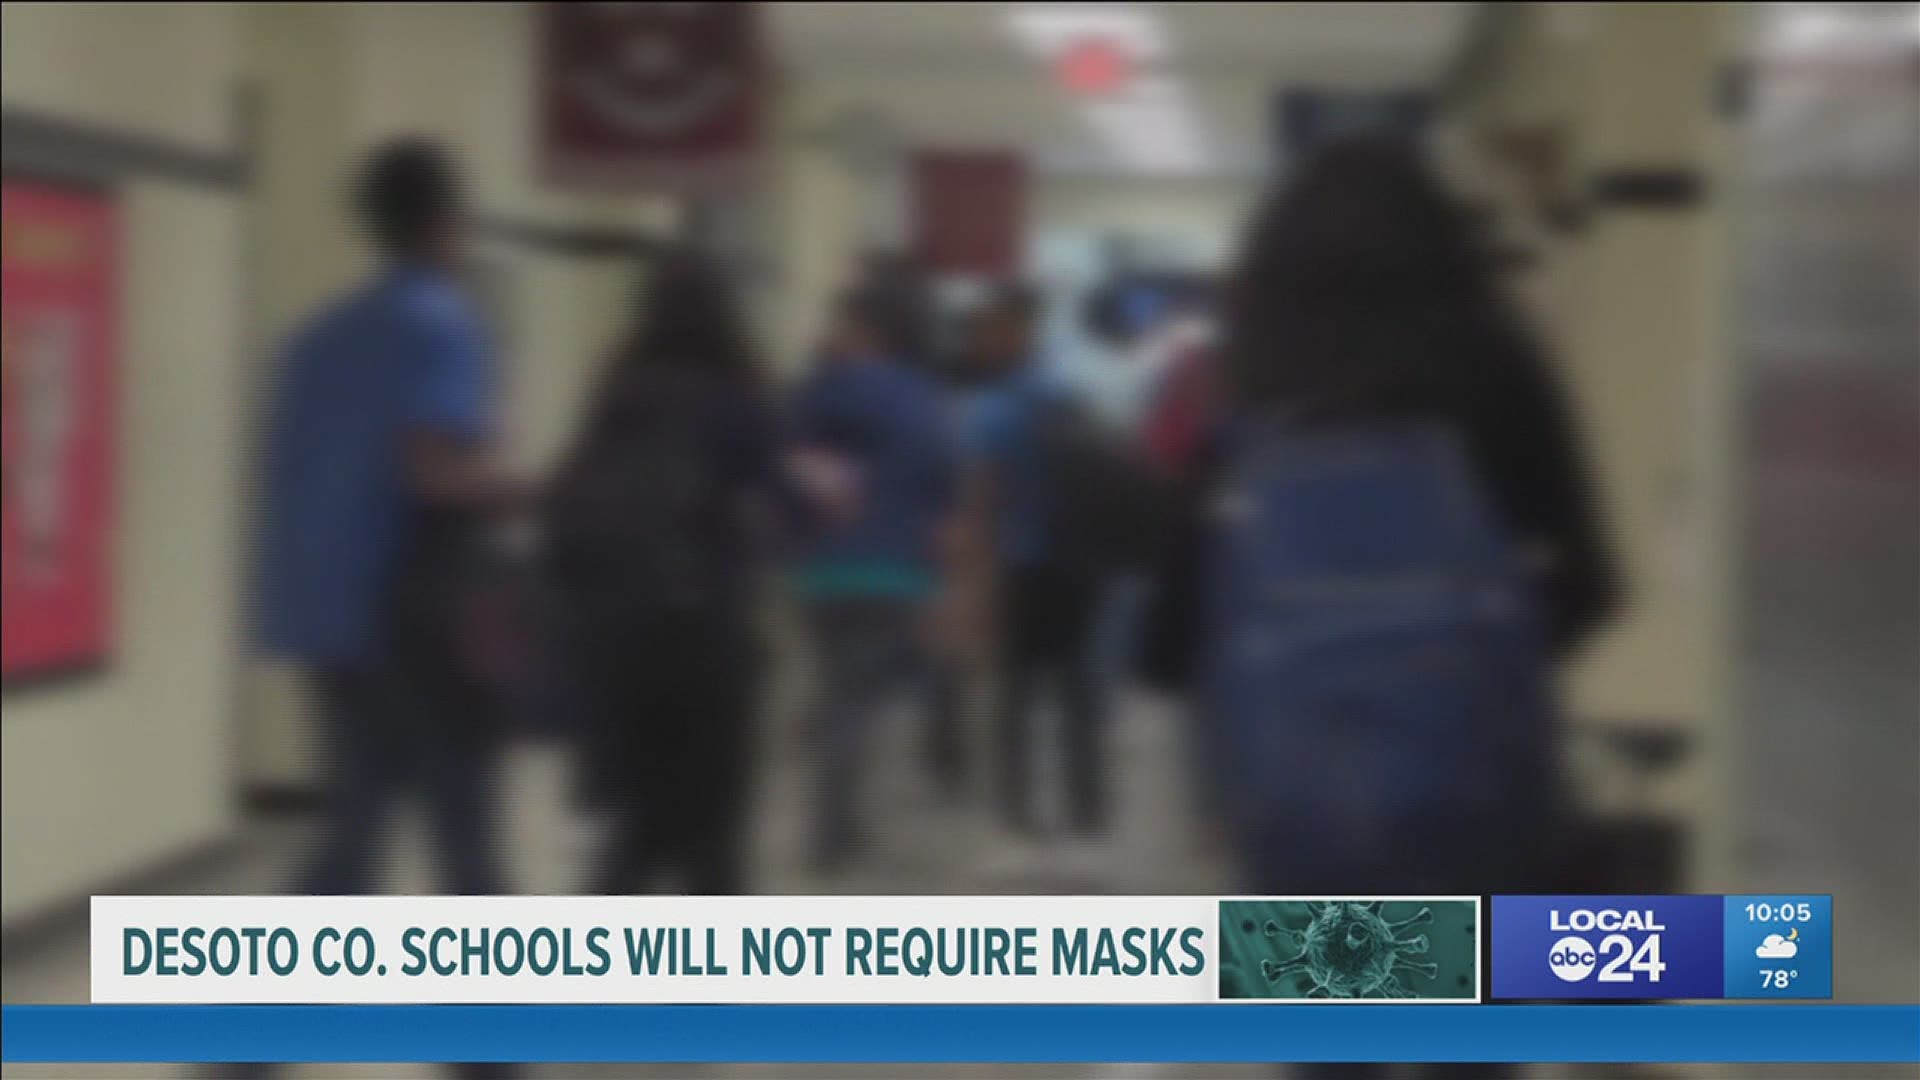 The Mississippi Health Department, the CDC, and the American Academy of Pediatrics all say that children need to wear masks in class.